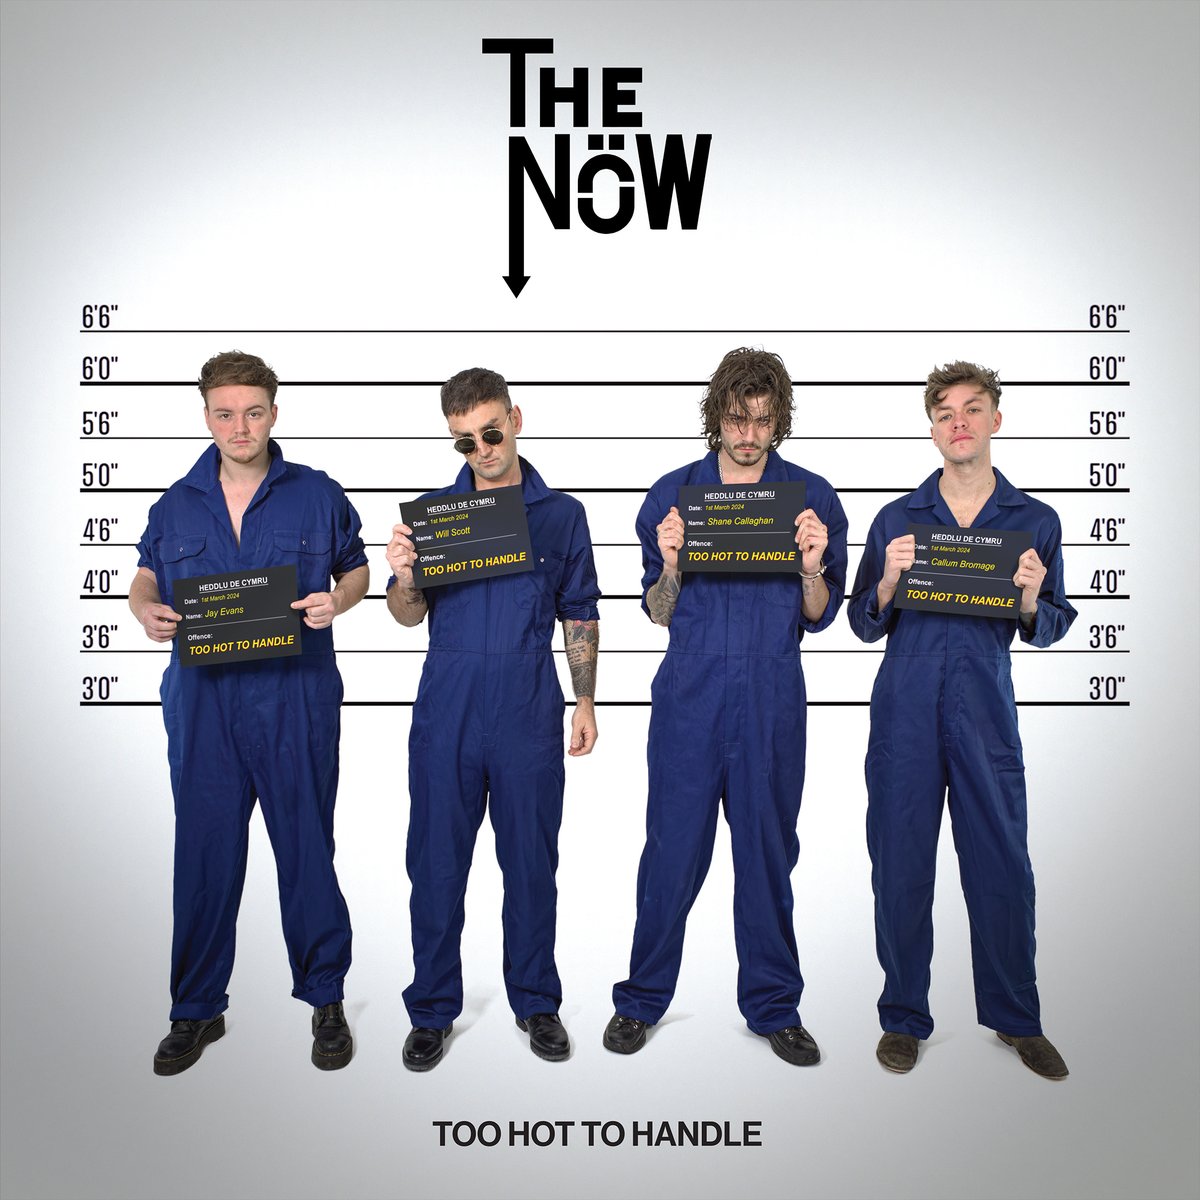 The debut album from @THENOWUK turns the head of Fabrications HQ, 'The band have a great sense of dynamics...fresh sounding, musically invigorating.' Read: fabricationshq.com/the-now---too-… Buy CD/vinyl: thenowuk.com